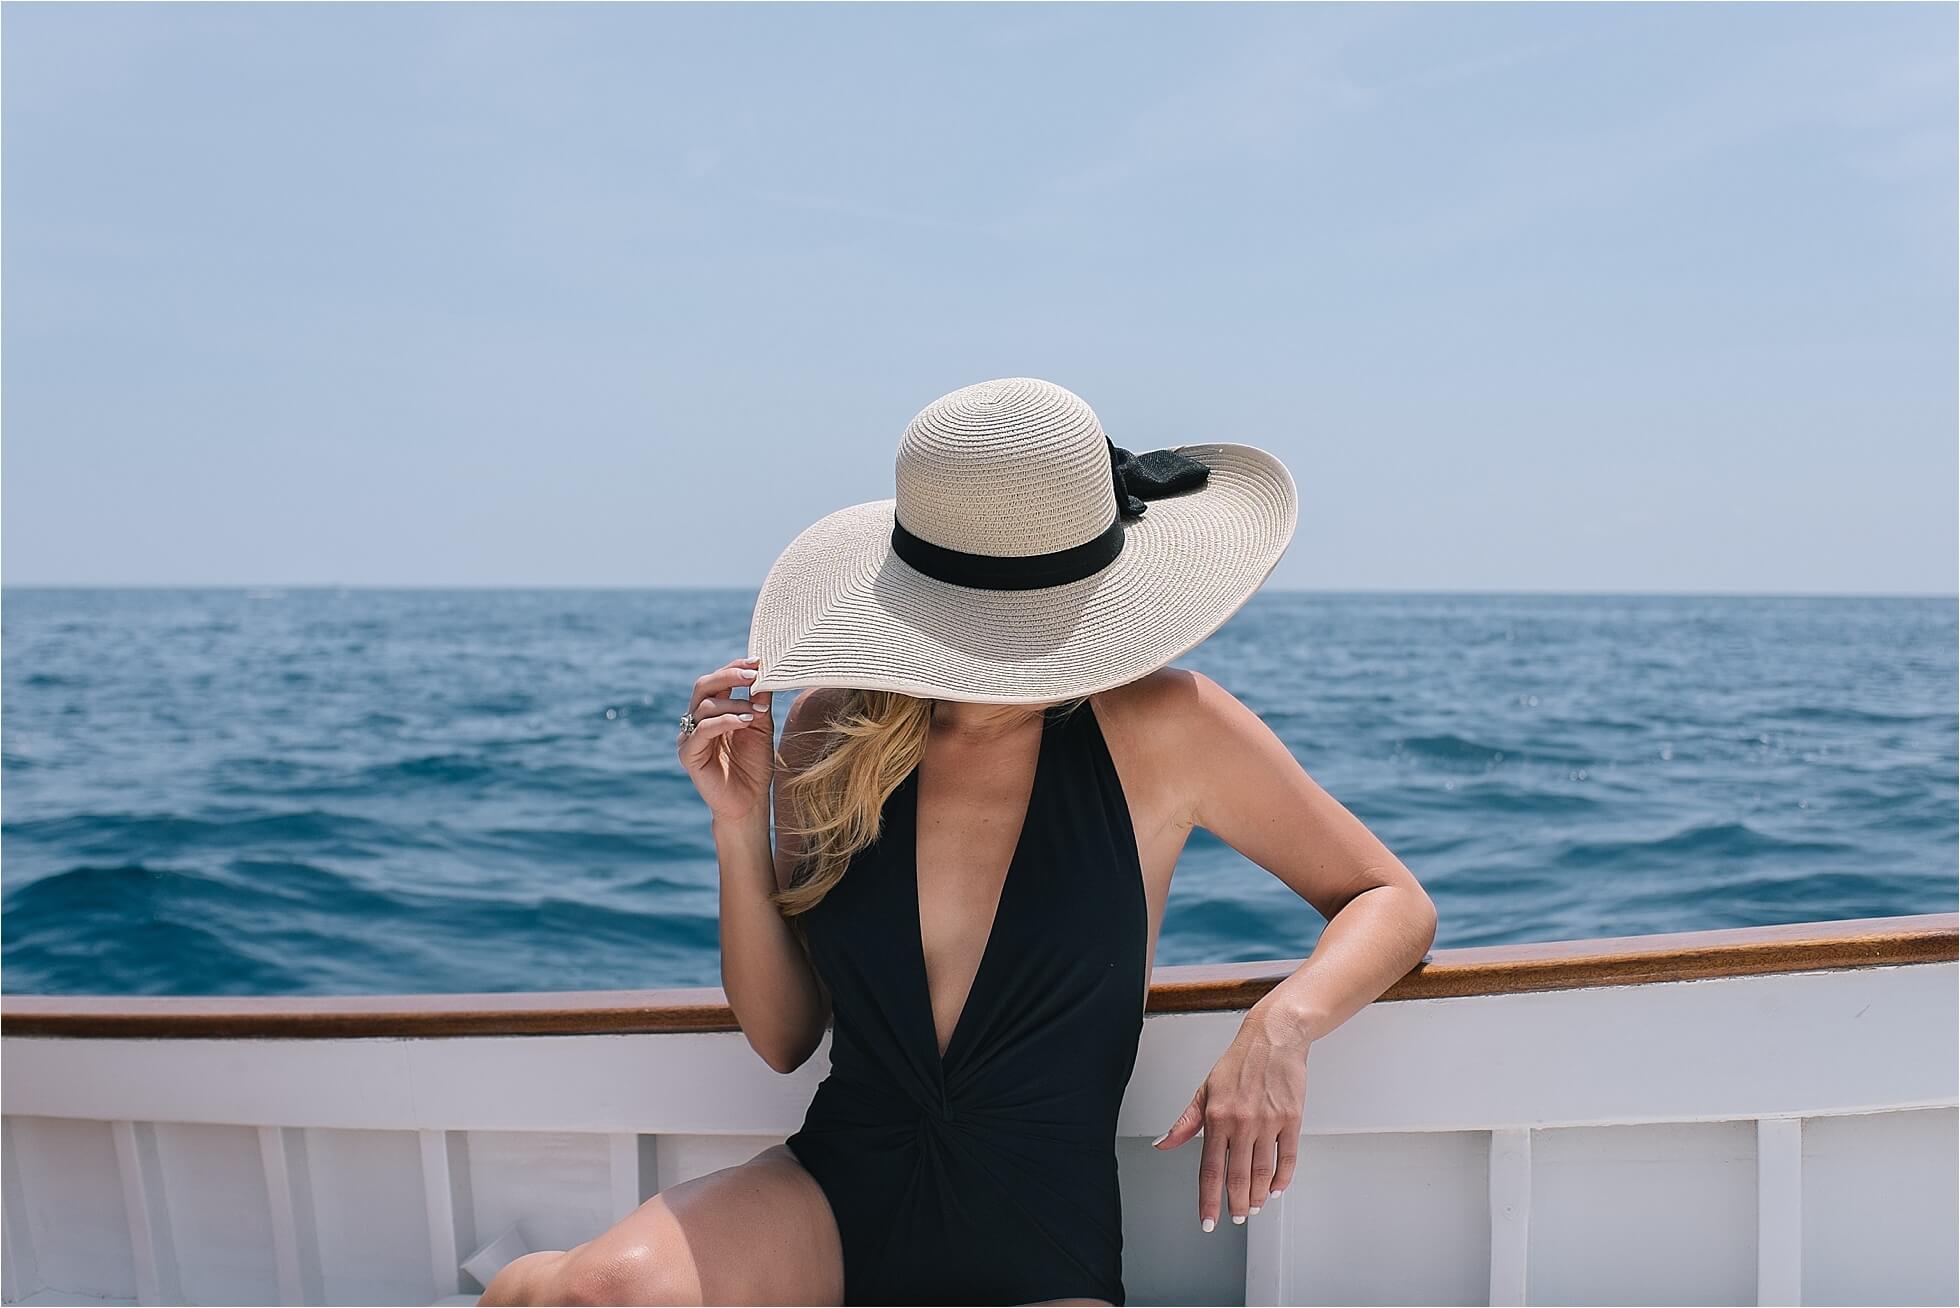 brighton keller wearing black plunge front one piece on private boat tour in capri island italy